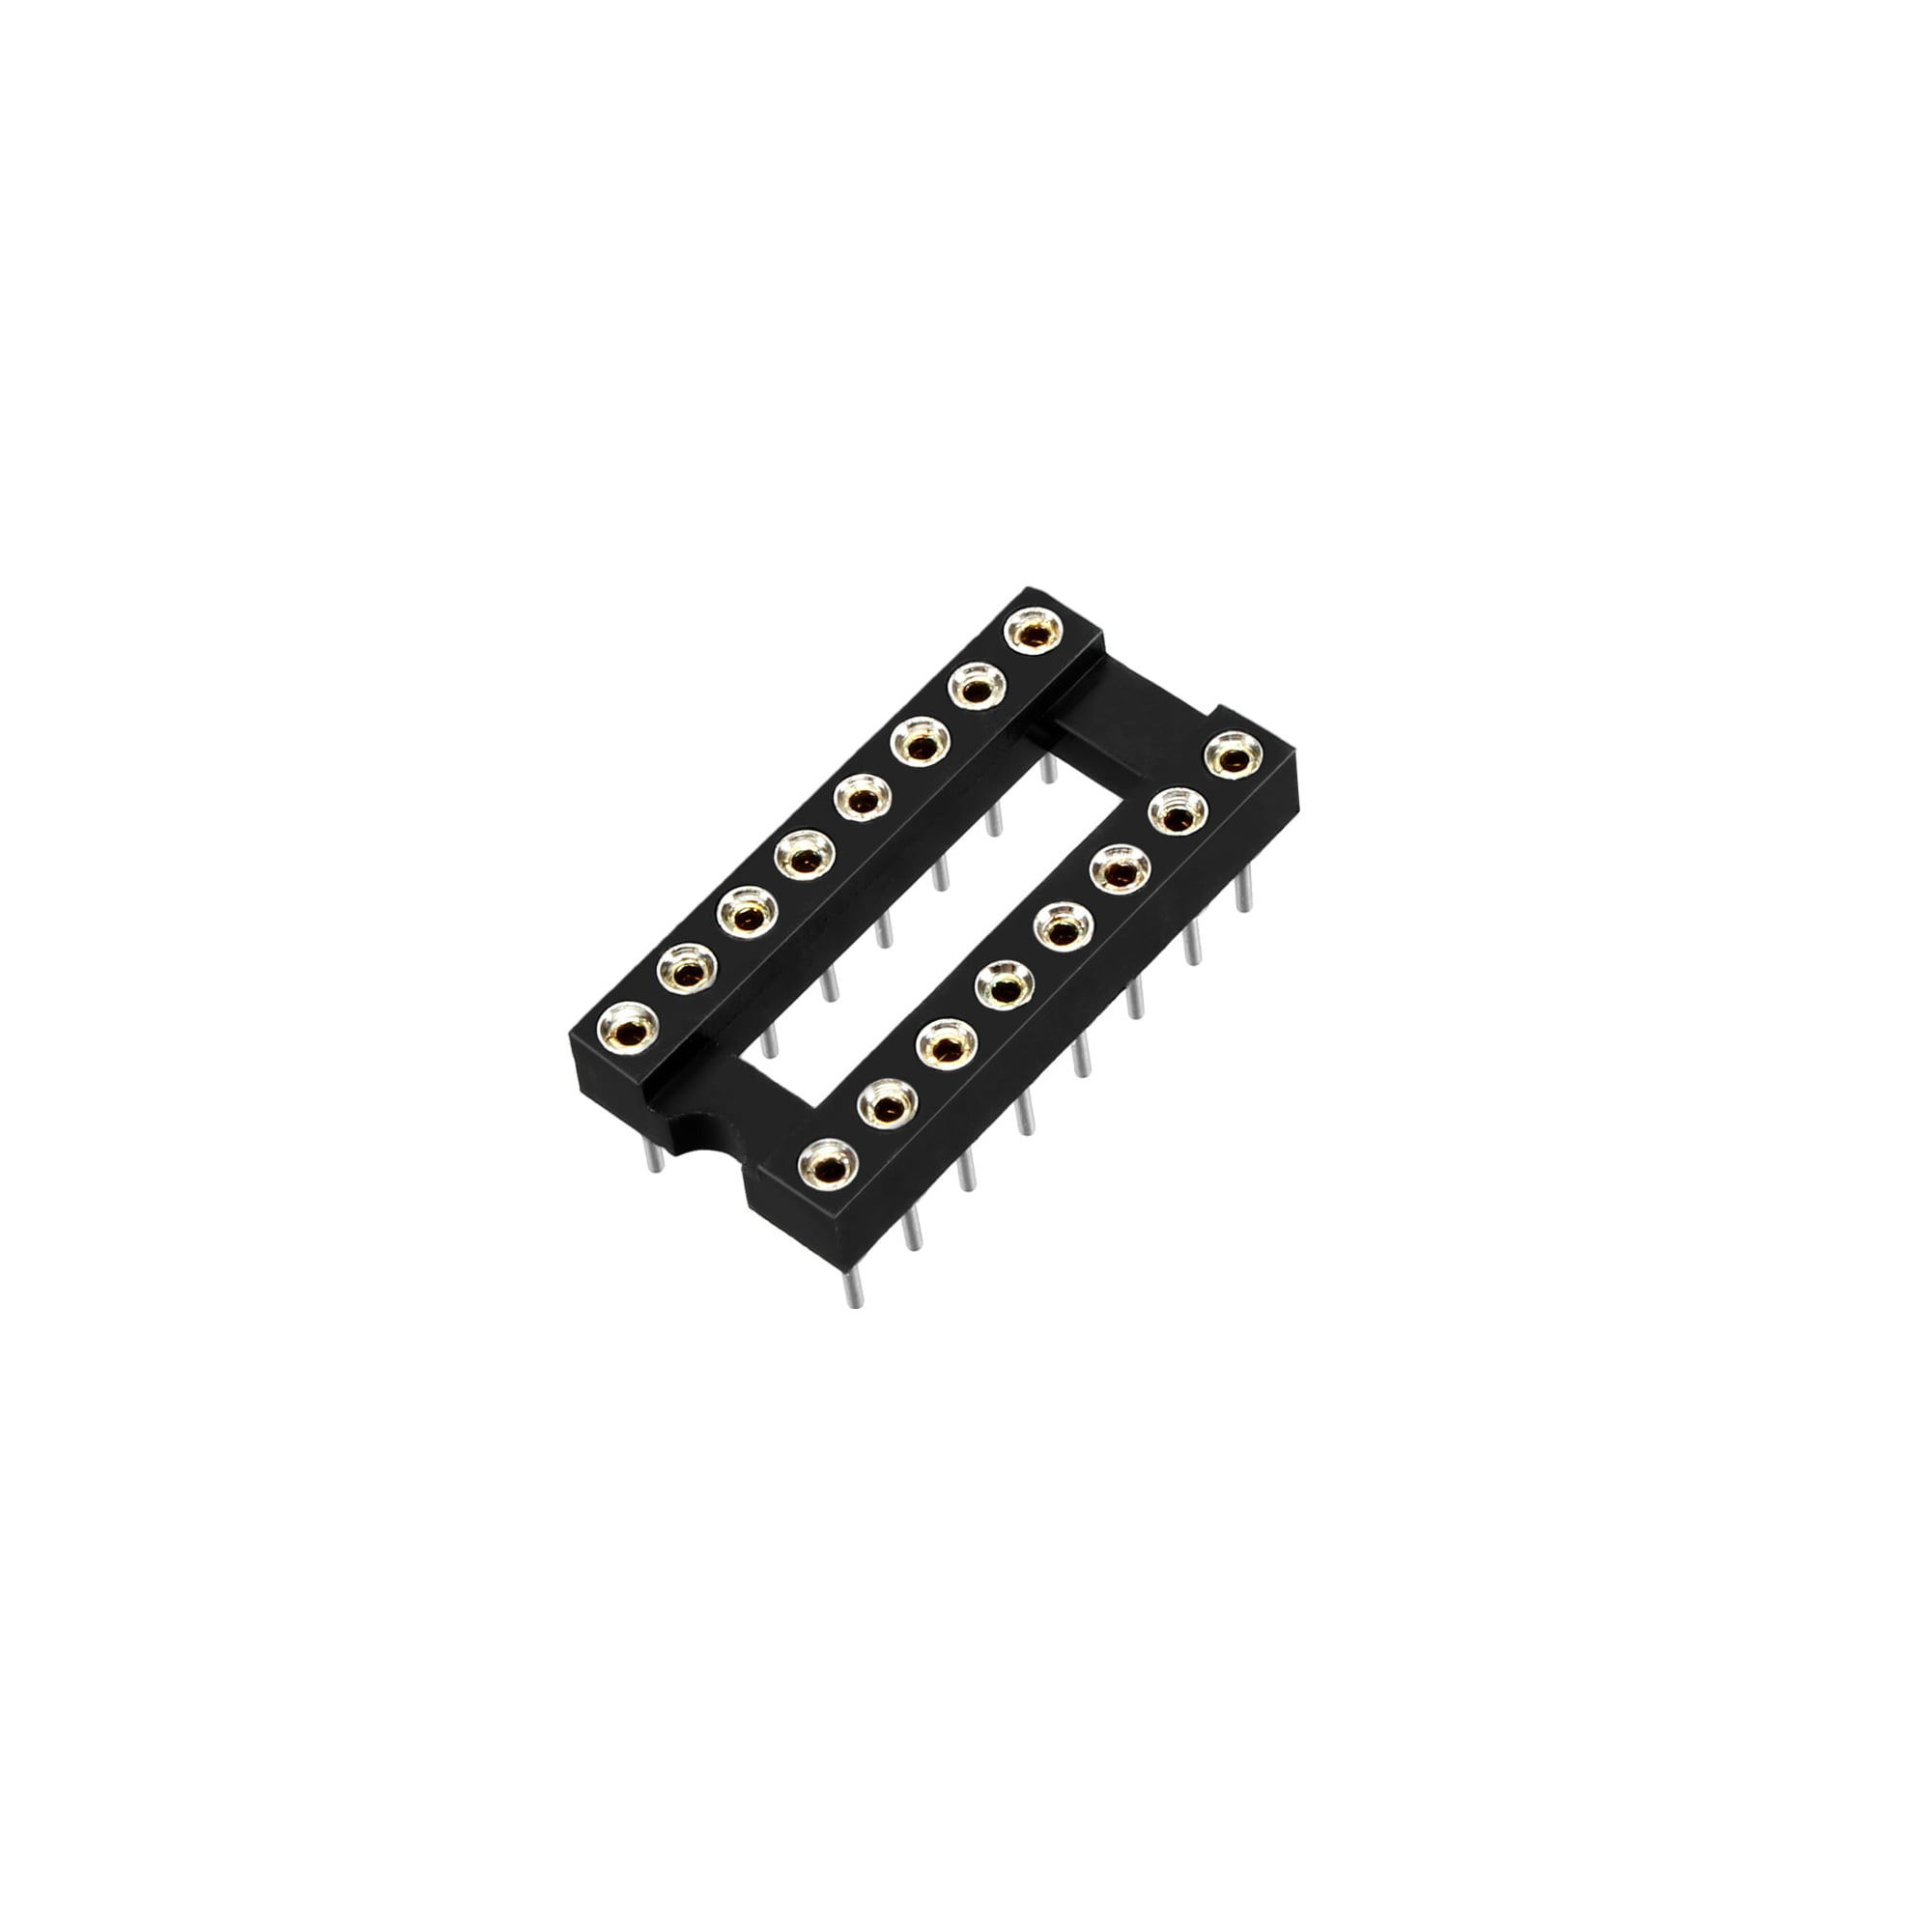 uxcell 10pcs 2.54mm Pitch 7.6mm Row Pitch 2 Row 6 Flat Pins Soldering DIP IC Chip Socket Adaptor 